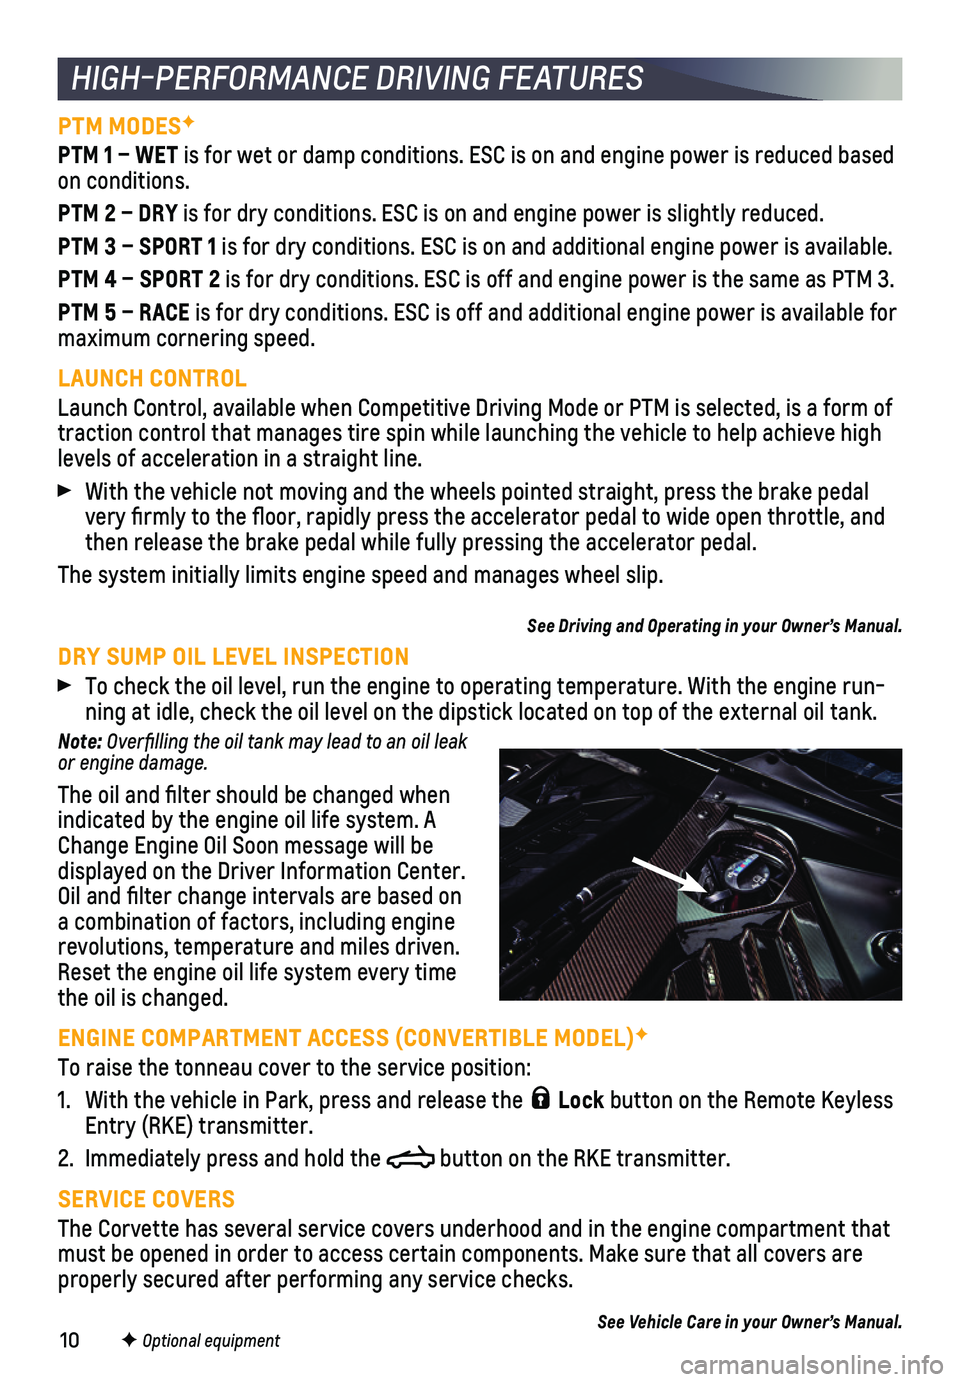 CHEVROLET CORVETTE 2021  Performance Get To Know Guide 10
HIGH-PERFORMANCE DRIVING FEATURES
PTM MODESF
PTM 1 – WET is for wet or damp conditions. ESC is on and engine power is reduced ba\
sed on conditions.
PTM 2 – DRY is for dry conditions. ESC is on